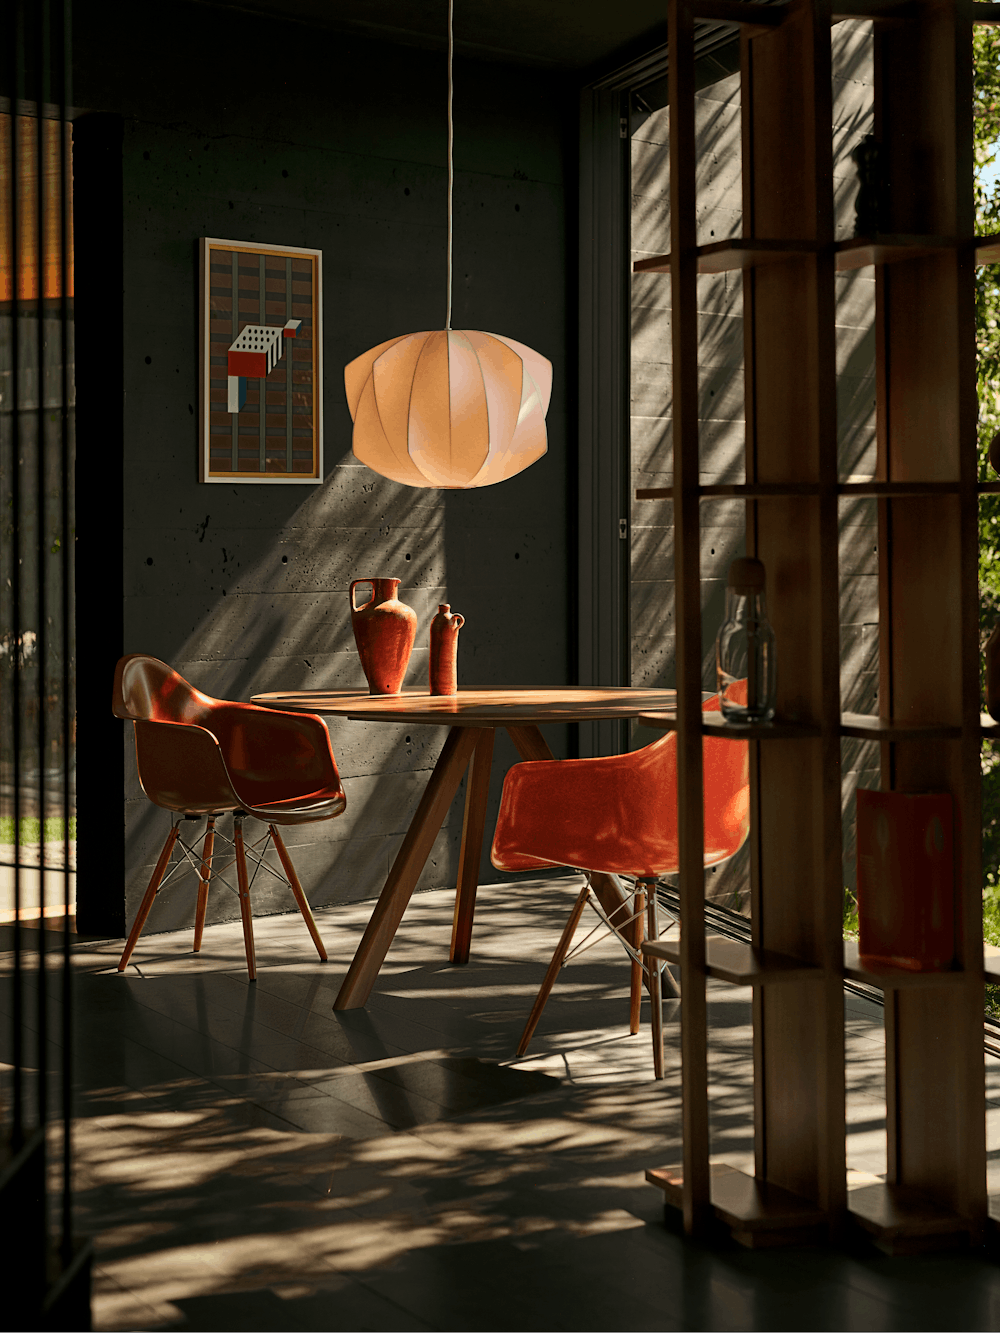 Eames Molded Fiberglass Chairs, CPH 20 Table and Nelson Propeller Pendant